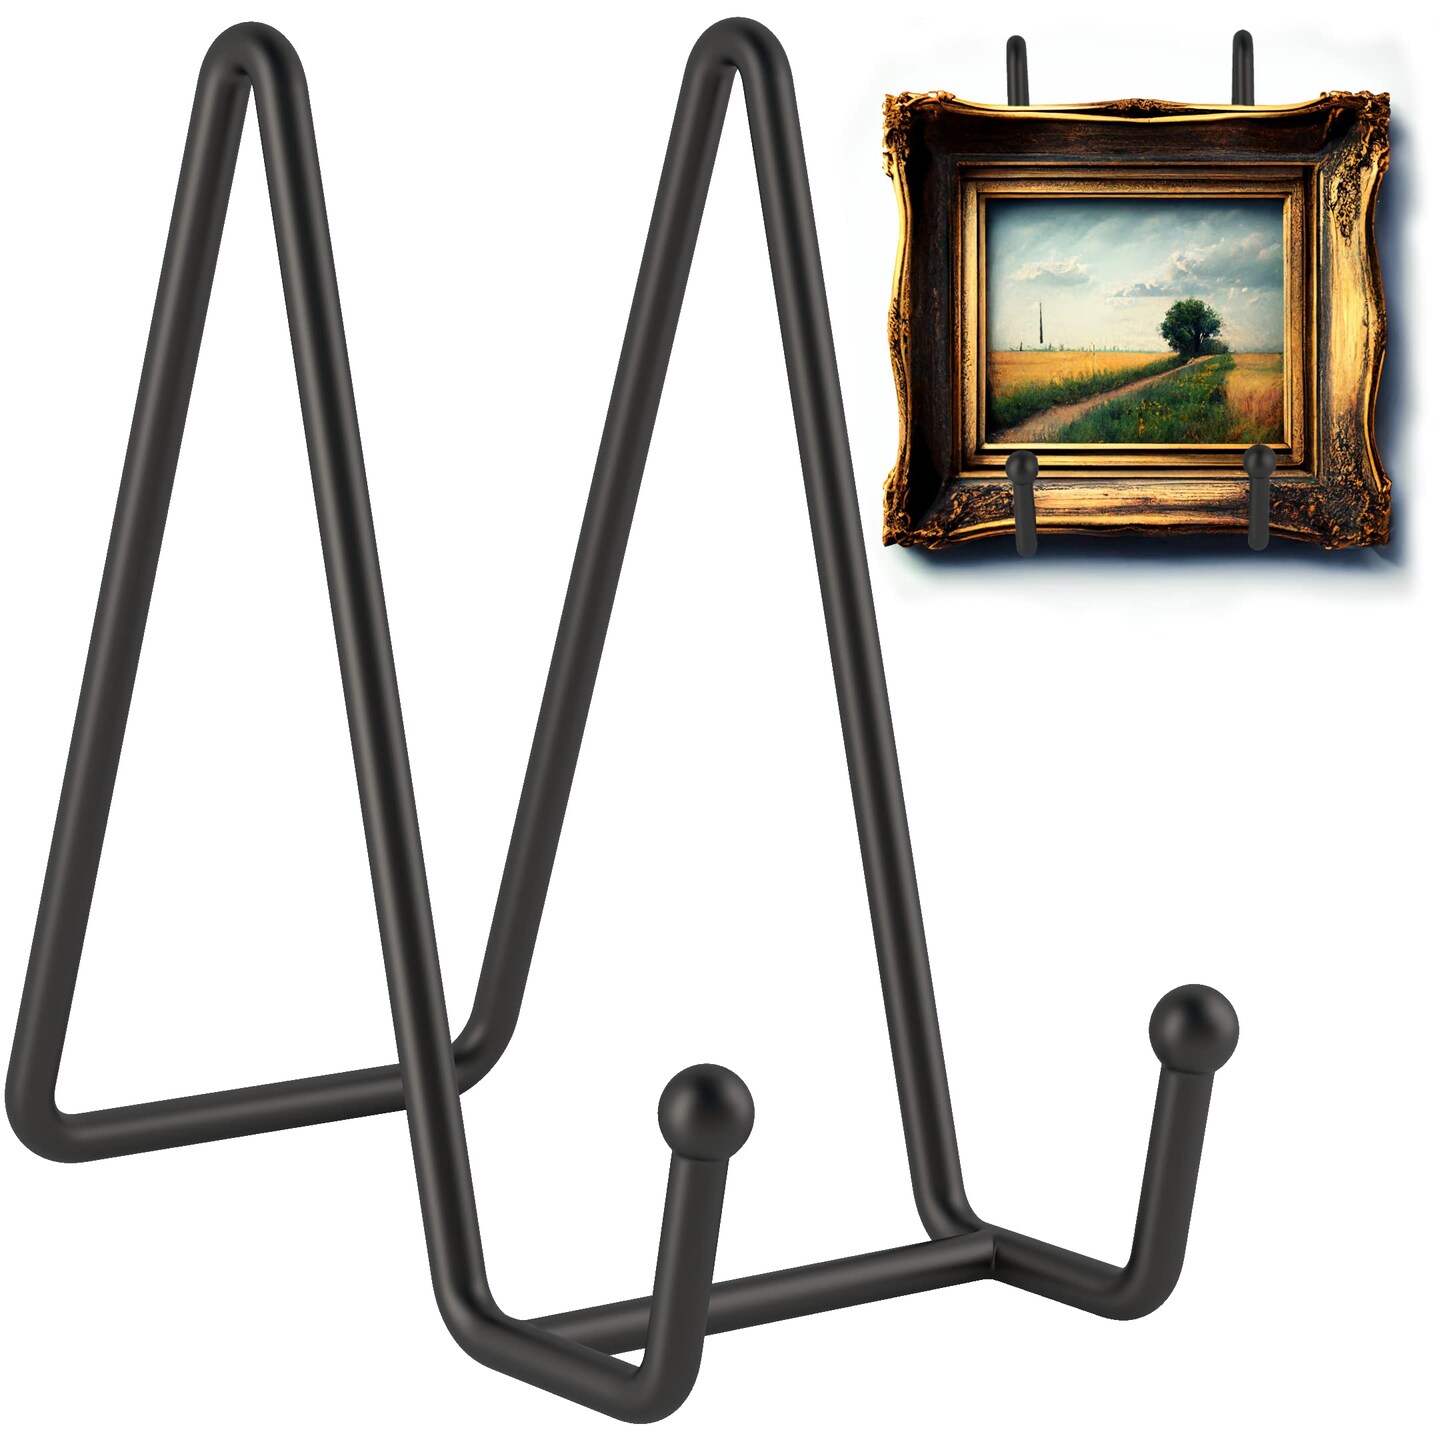 Petiy Beauty 2 Pack 6 Inch Plate Stands for Display, Black Iron Plate Holder Display Stand, Metal Frame Holder Stand for Picture, Decorative Plate Dish, Book, Photo Easel and Tabletop Artistic Work